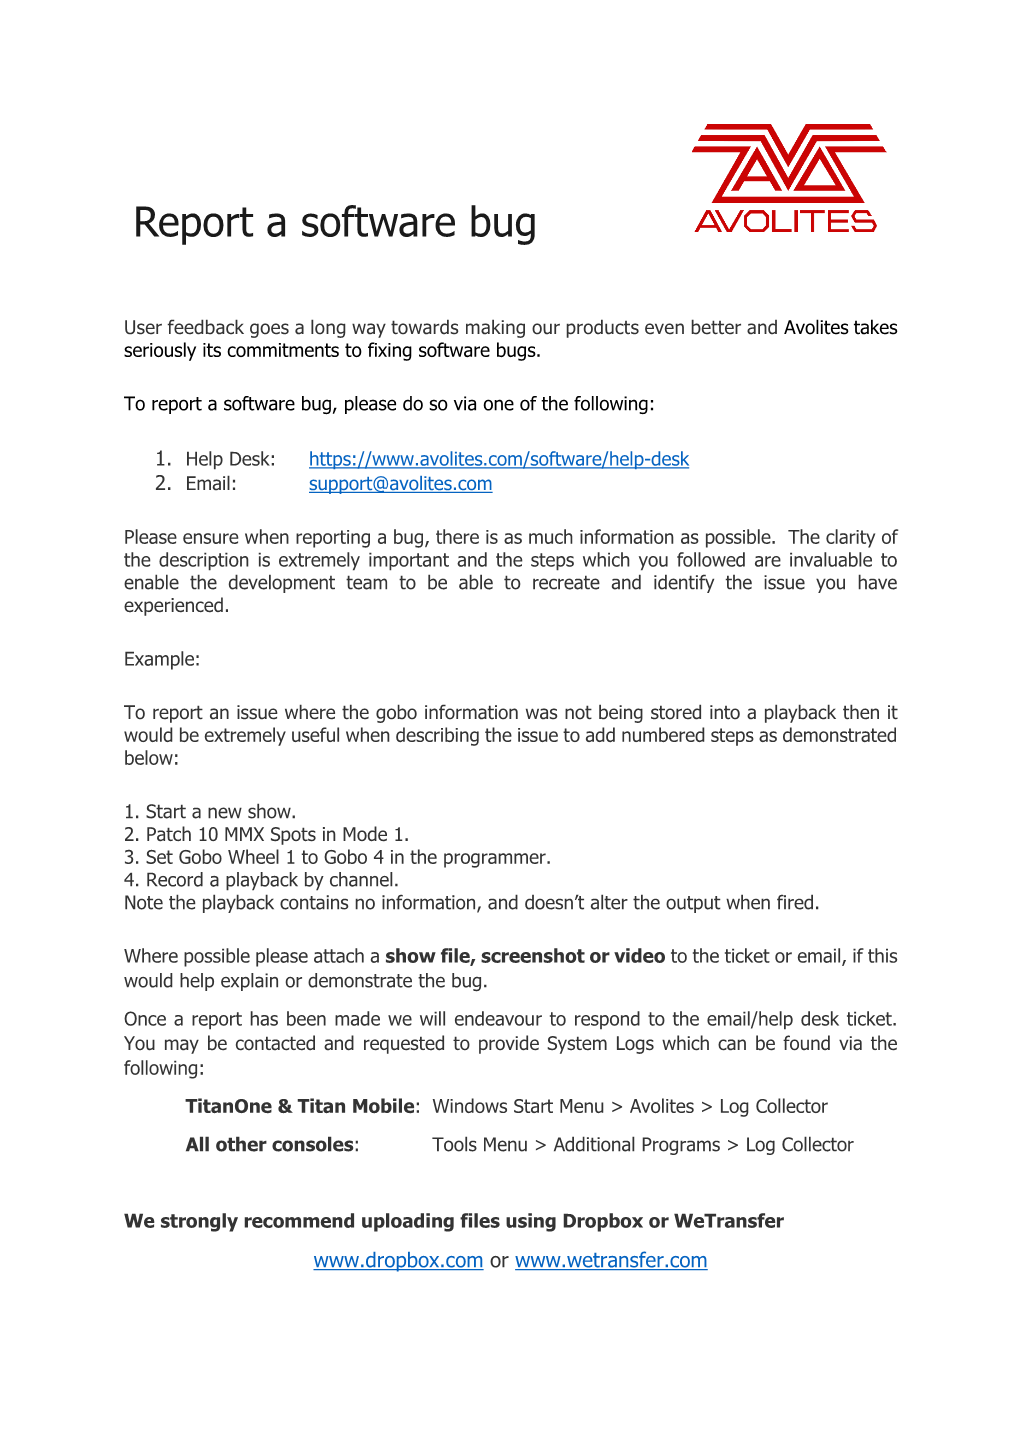 Reporting a Software